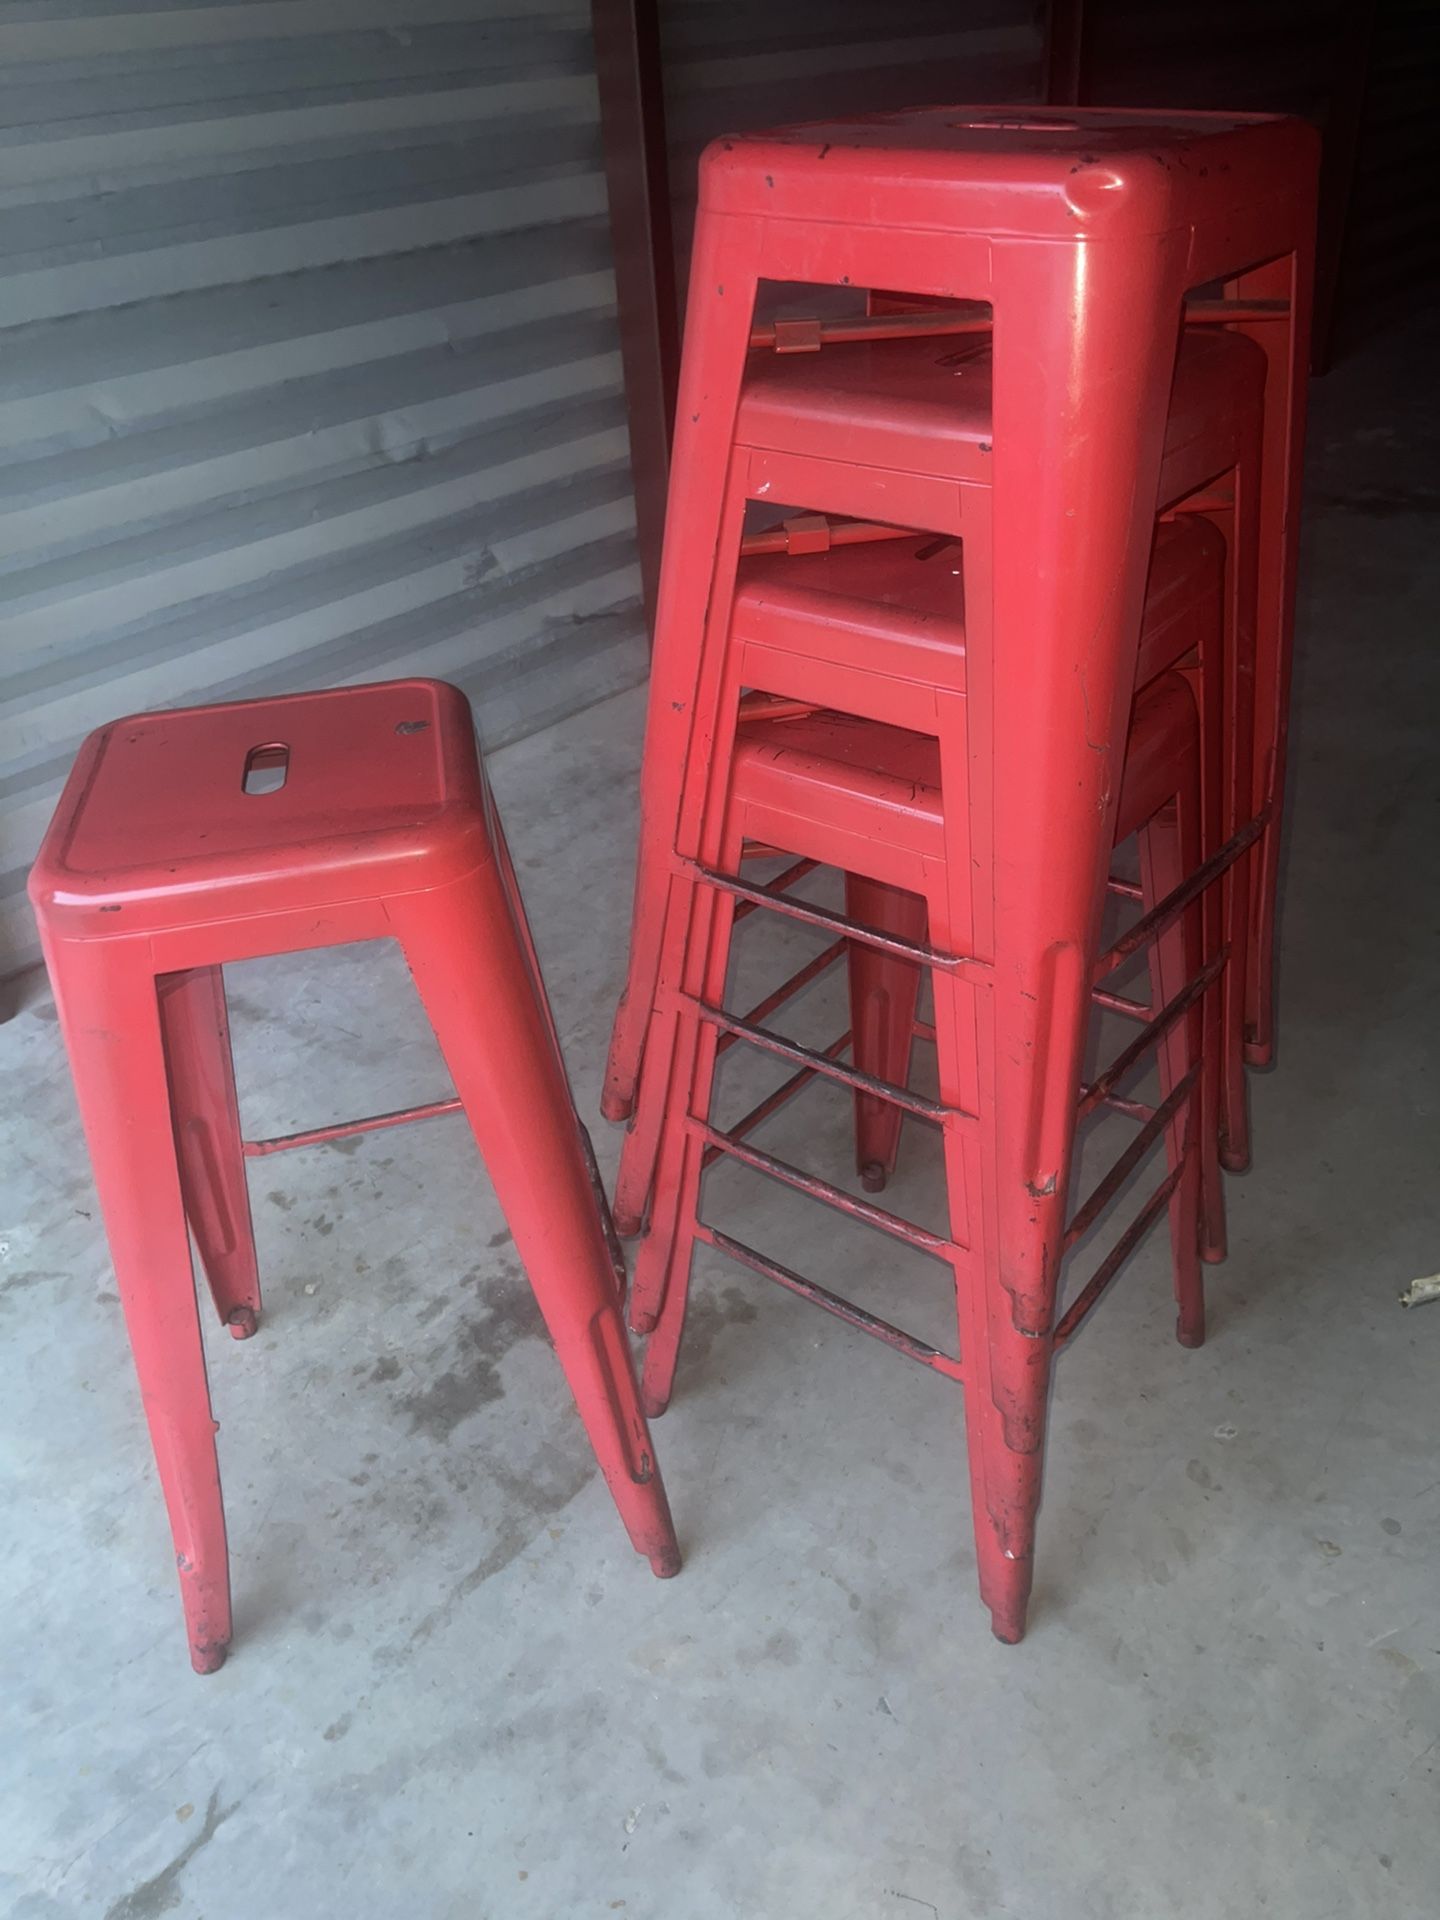  "Industrial-Grade Metal Stools in Red for Commercial Kitchen Use - Low Priced and Used Equipment in 2023 with Heavy Duty Construction and Protective 